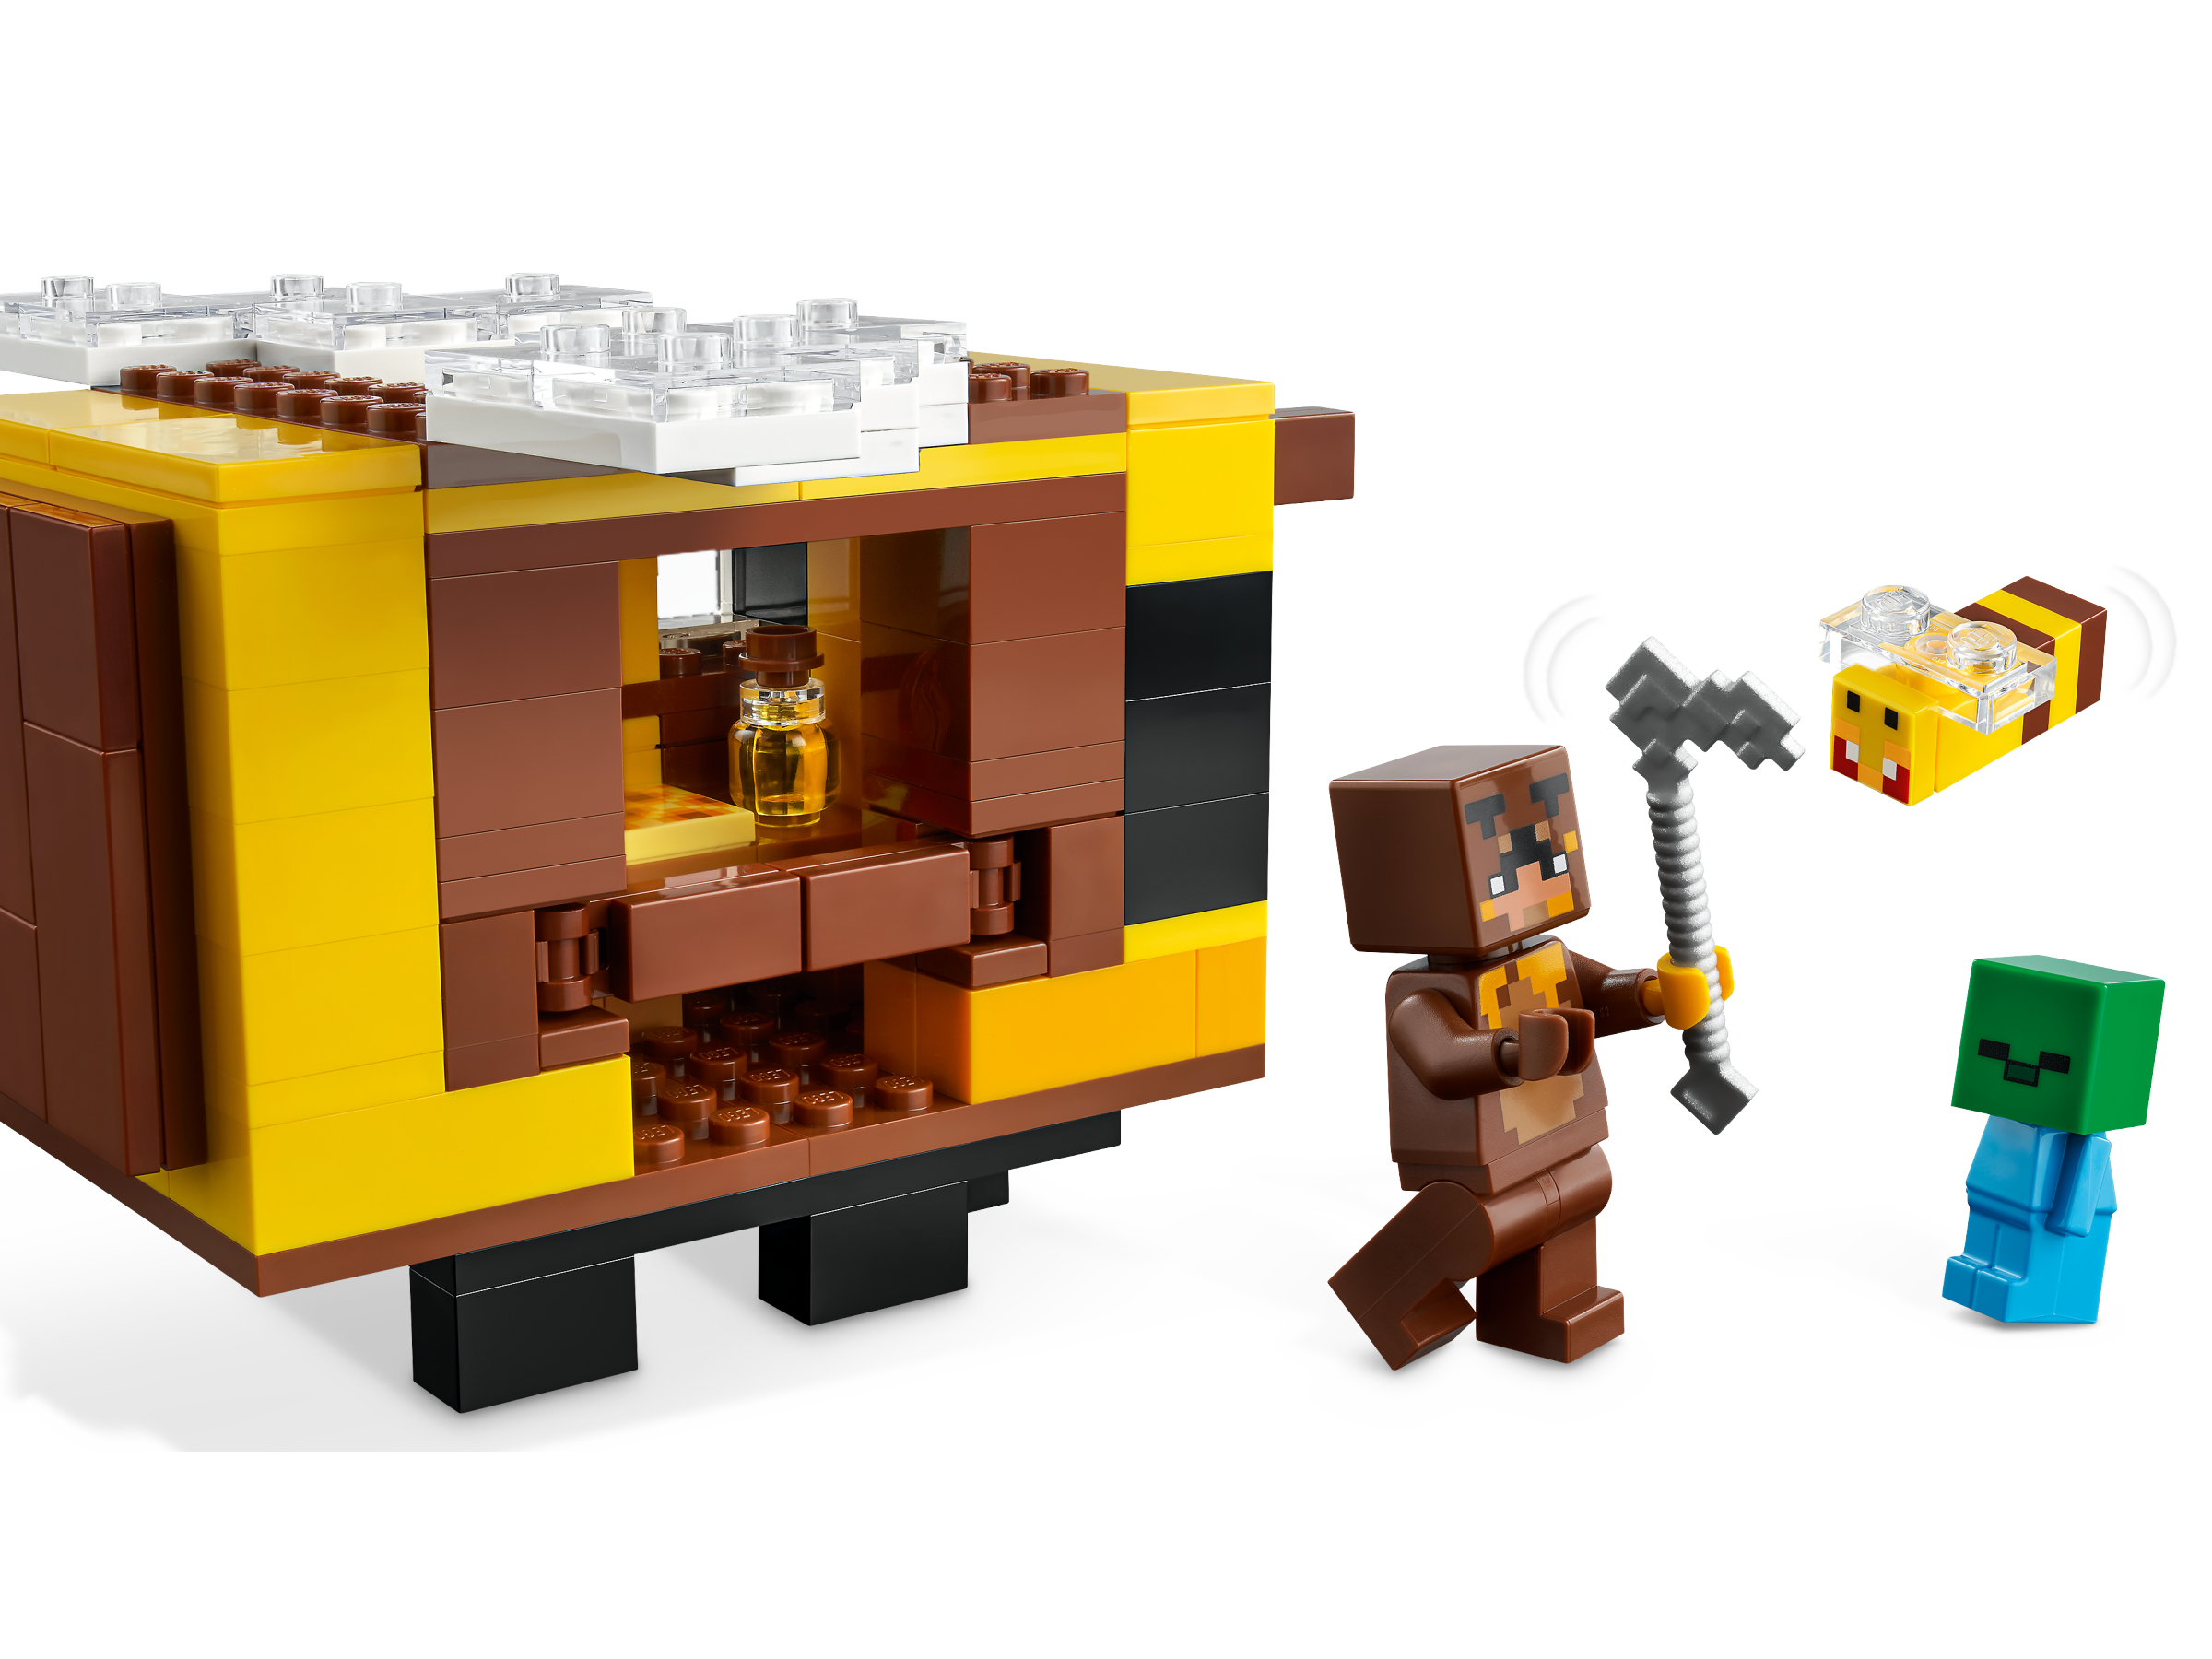 Two new LEGO Minecraft sets announced at LEGO CON 2022! - Jay's Brick Blog